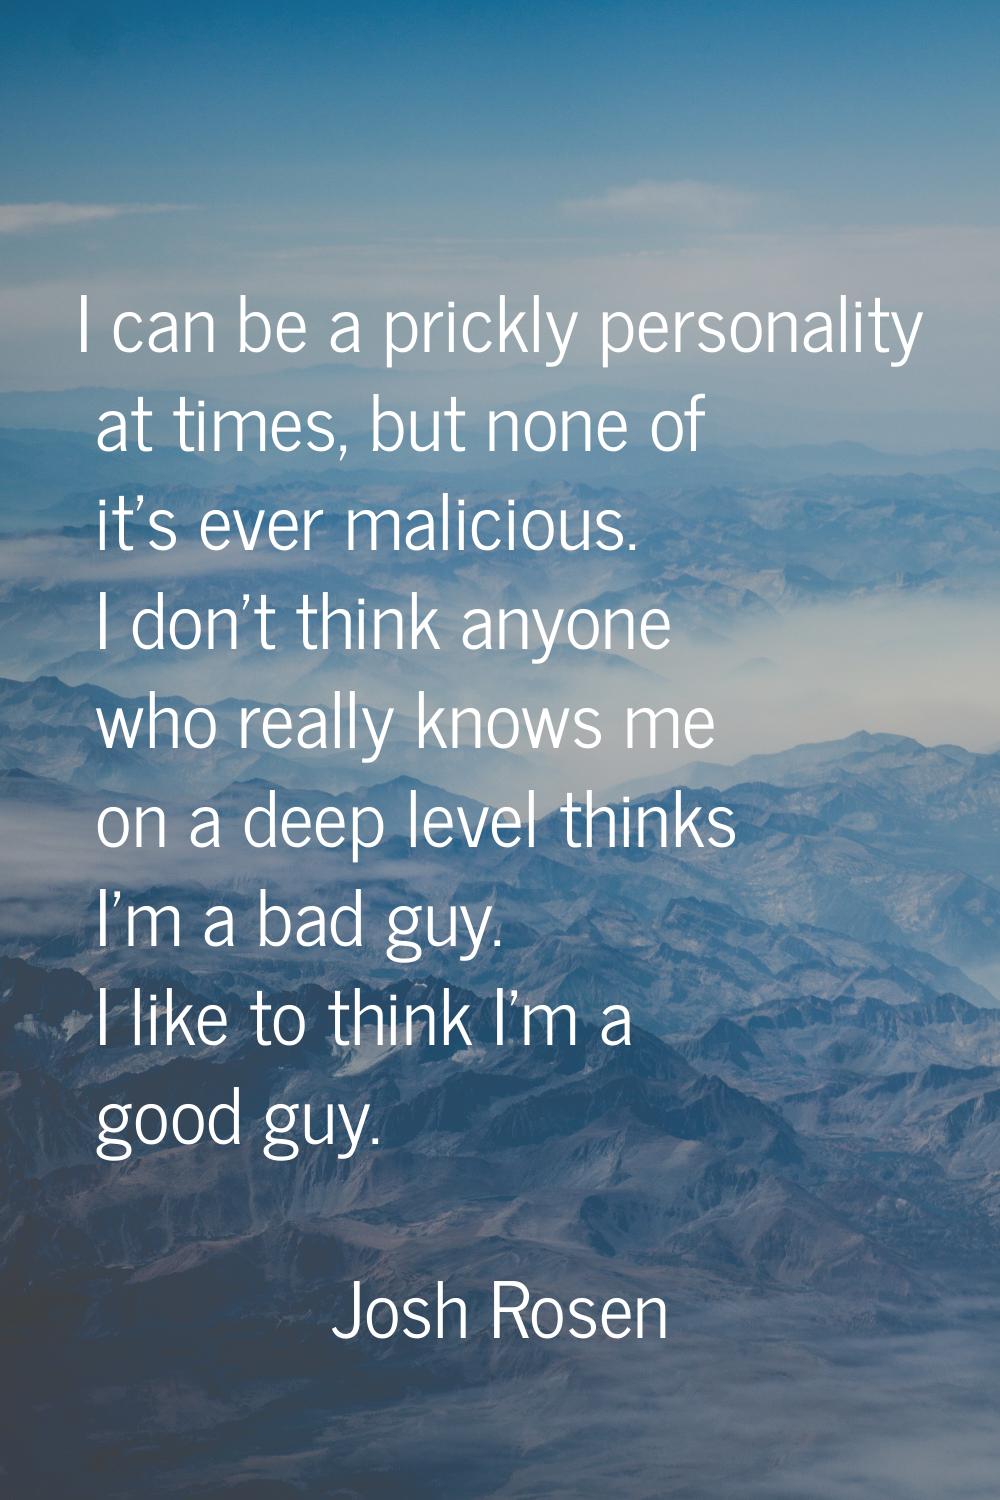 I can be a prickly personality at times, but none of it's ever malicious. I don't think anyone who 